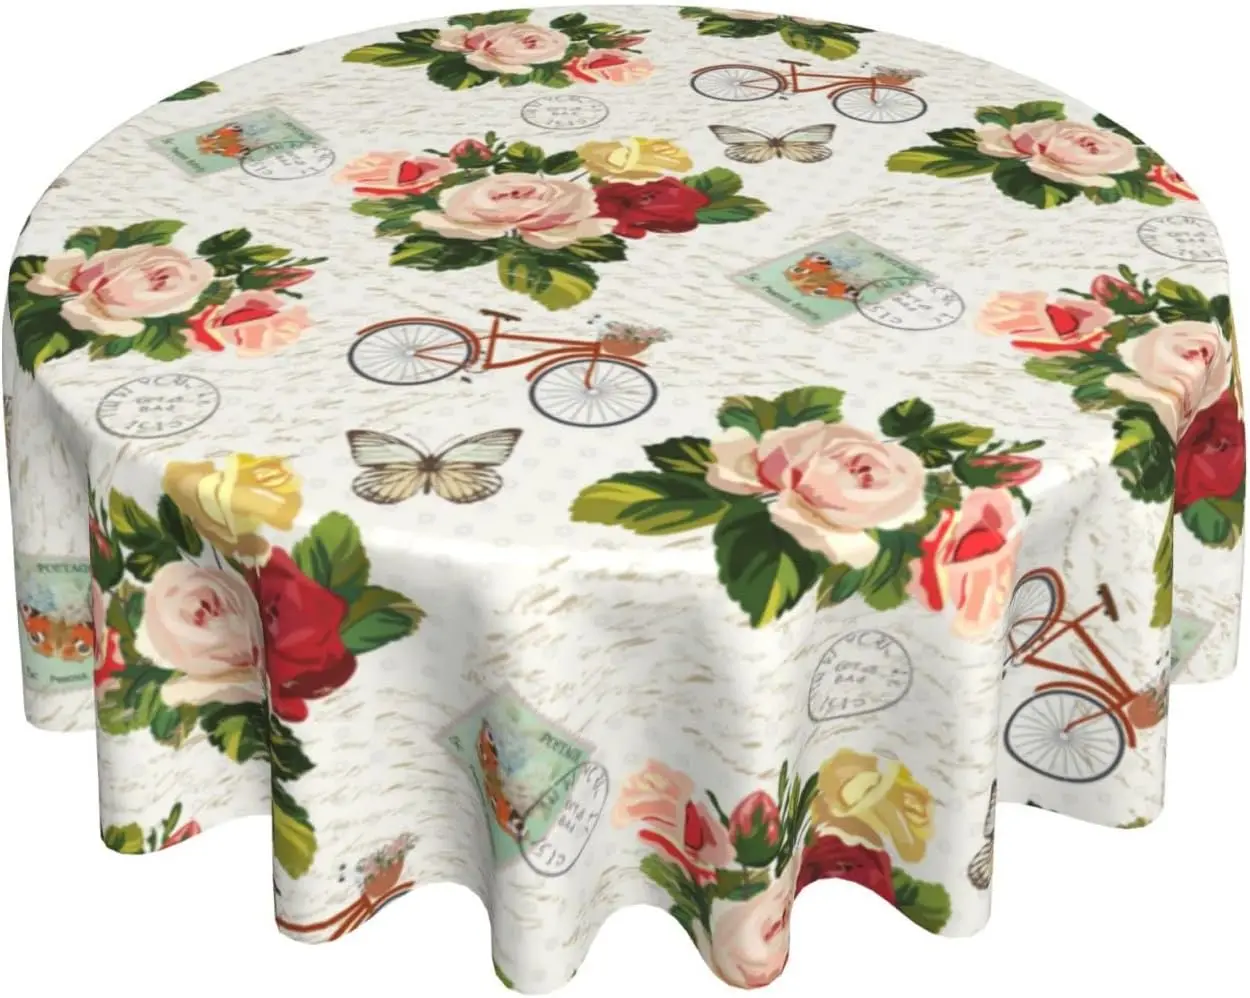 

Butterfly Tablecloth 60 Inch Vintage Floral Bicycle Spring Decorative Romantic Round Table Cloth for Kitchen Dining Room Patio